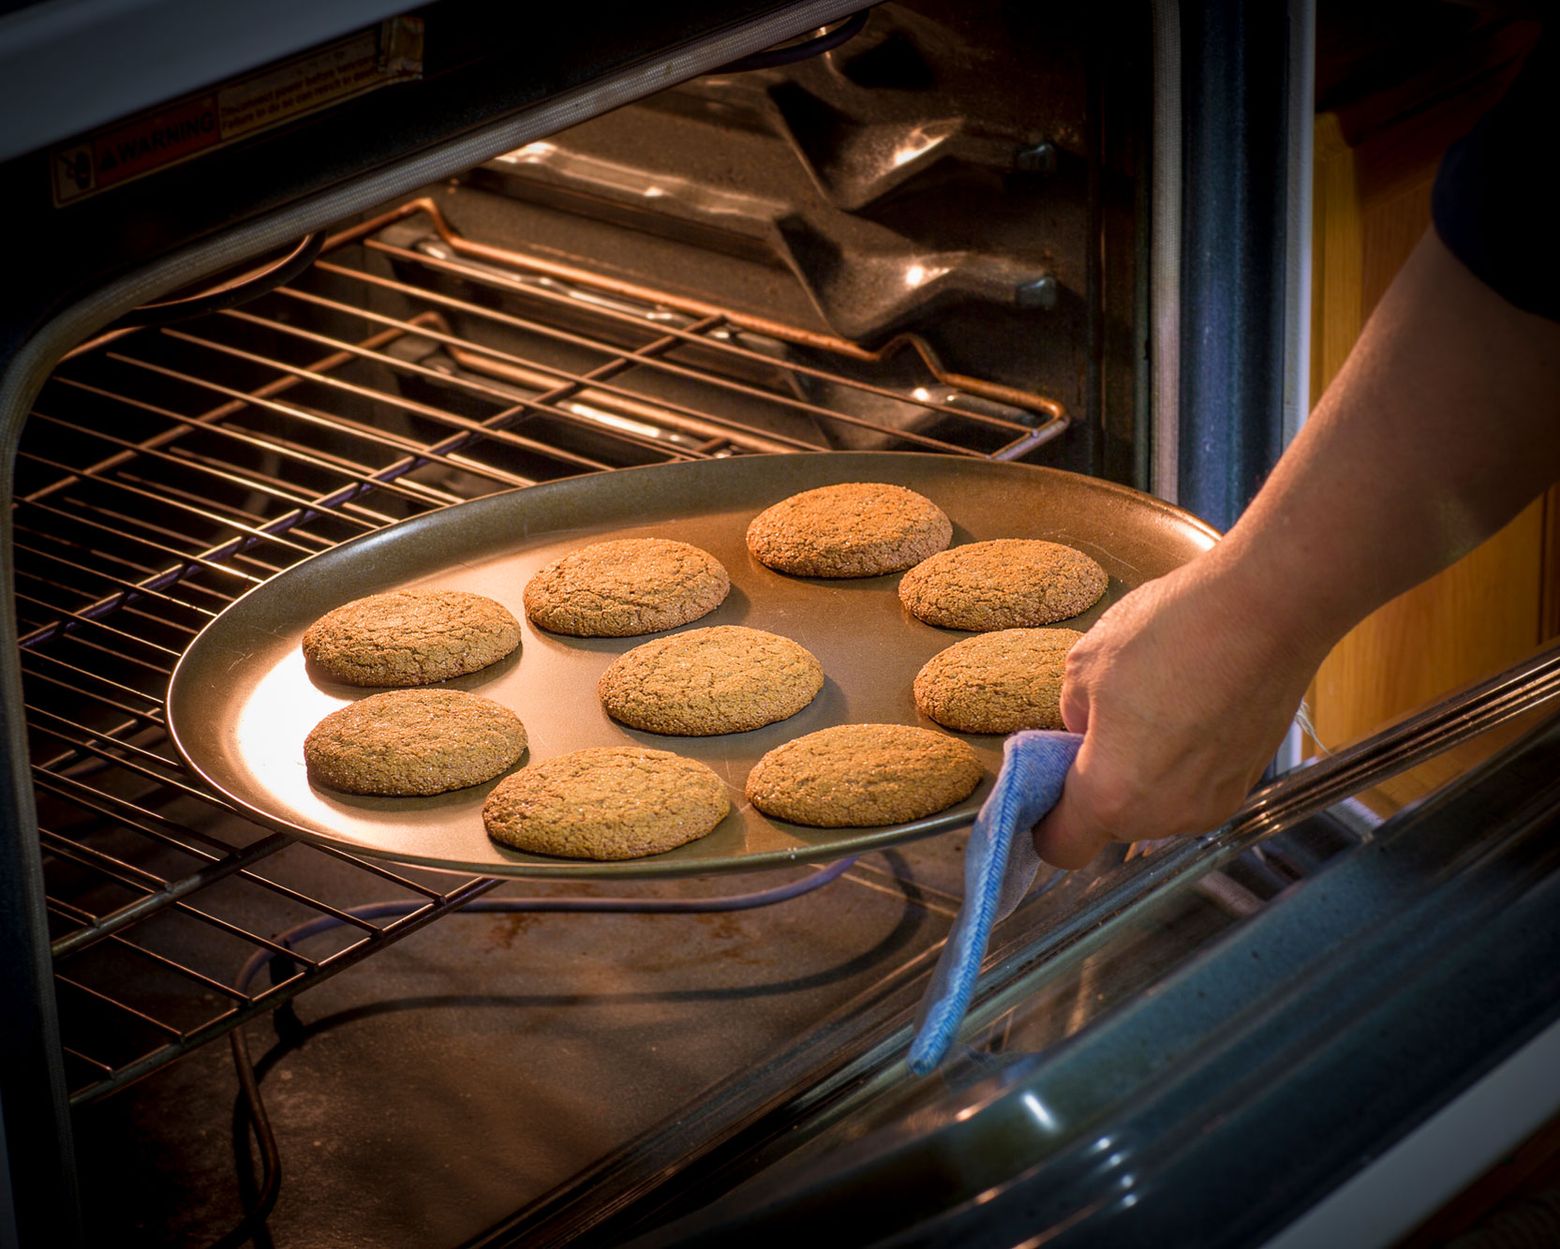 How to Test Your Oven Temperature Without a Thermometer Recipe